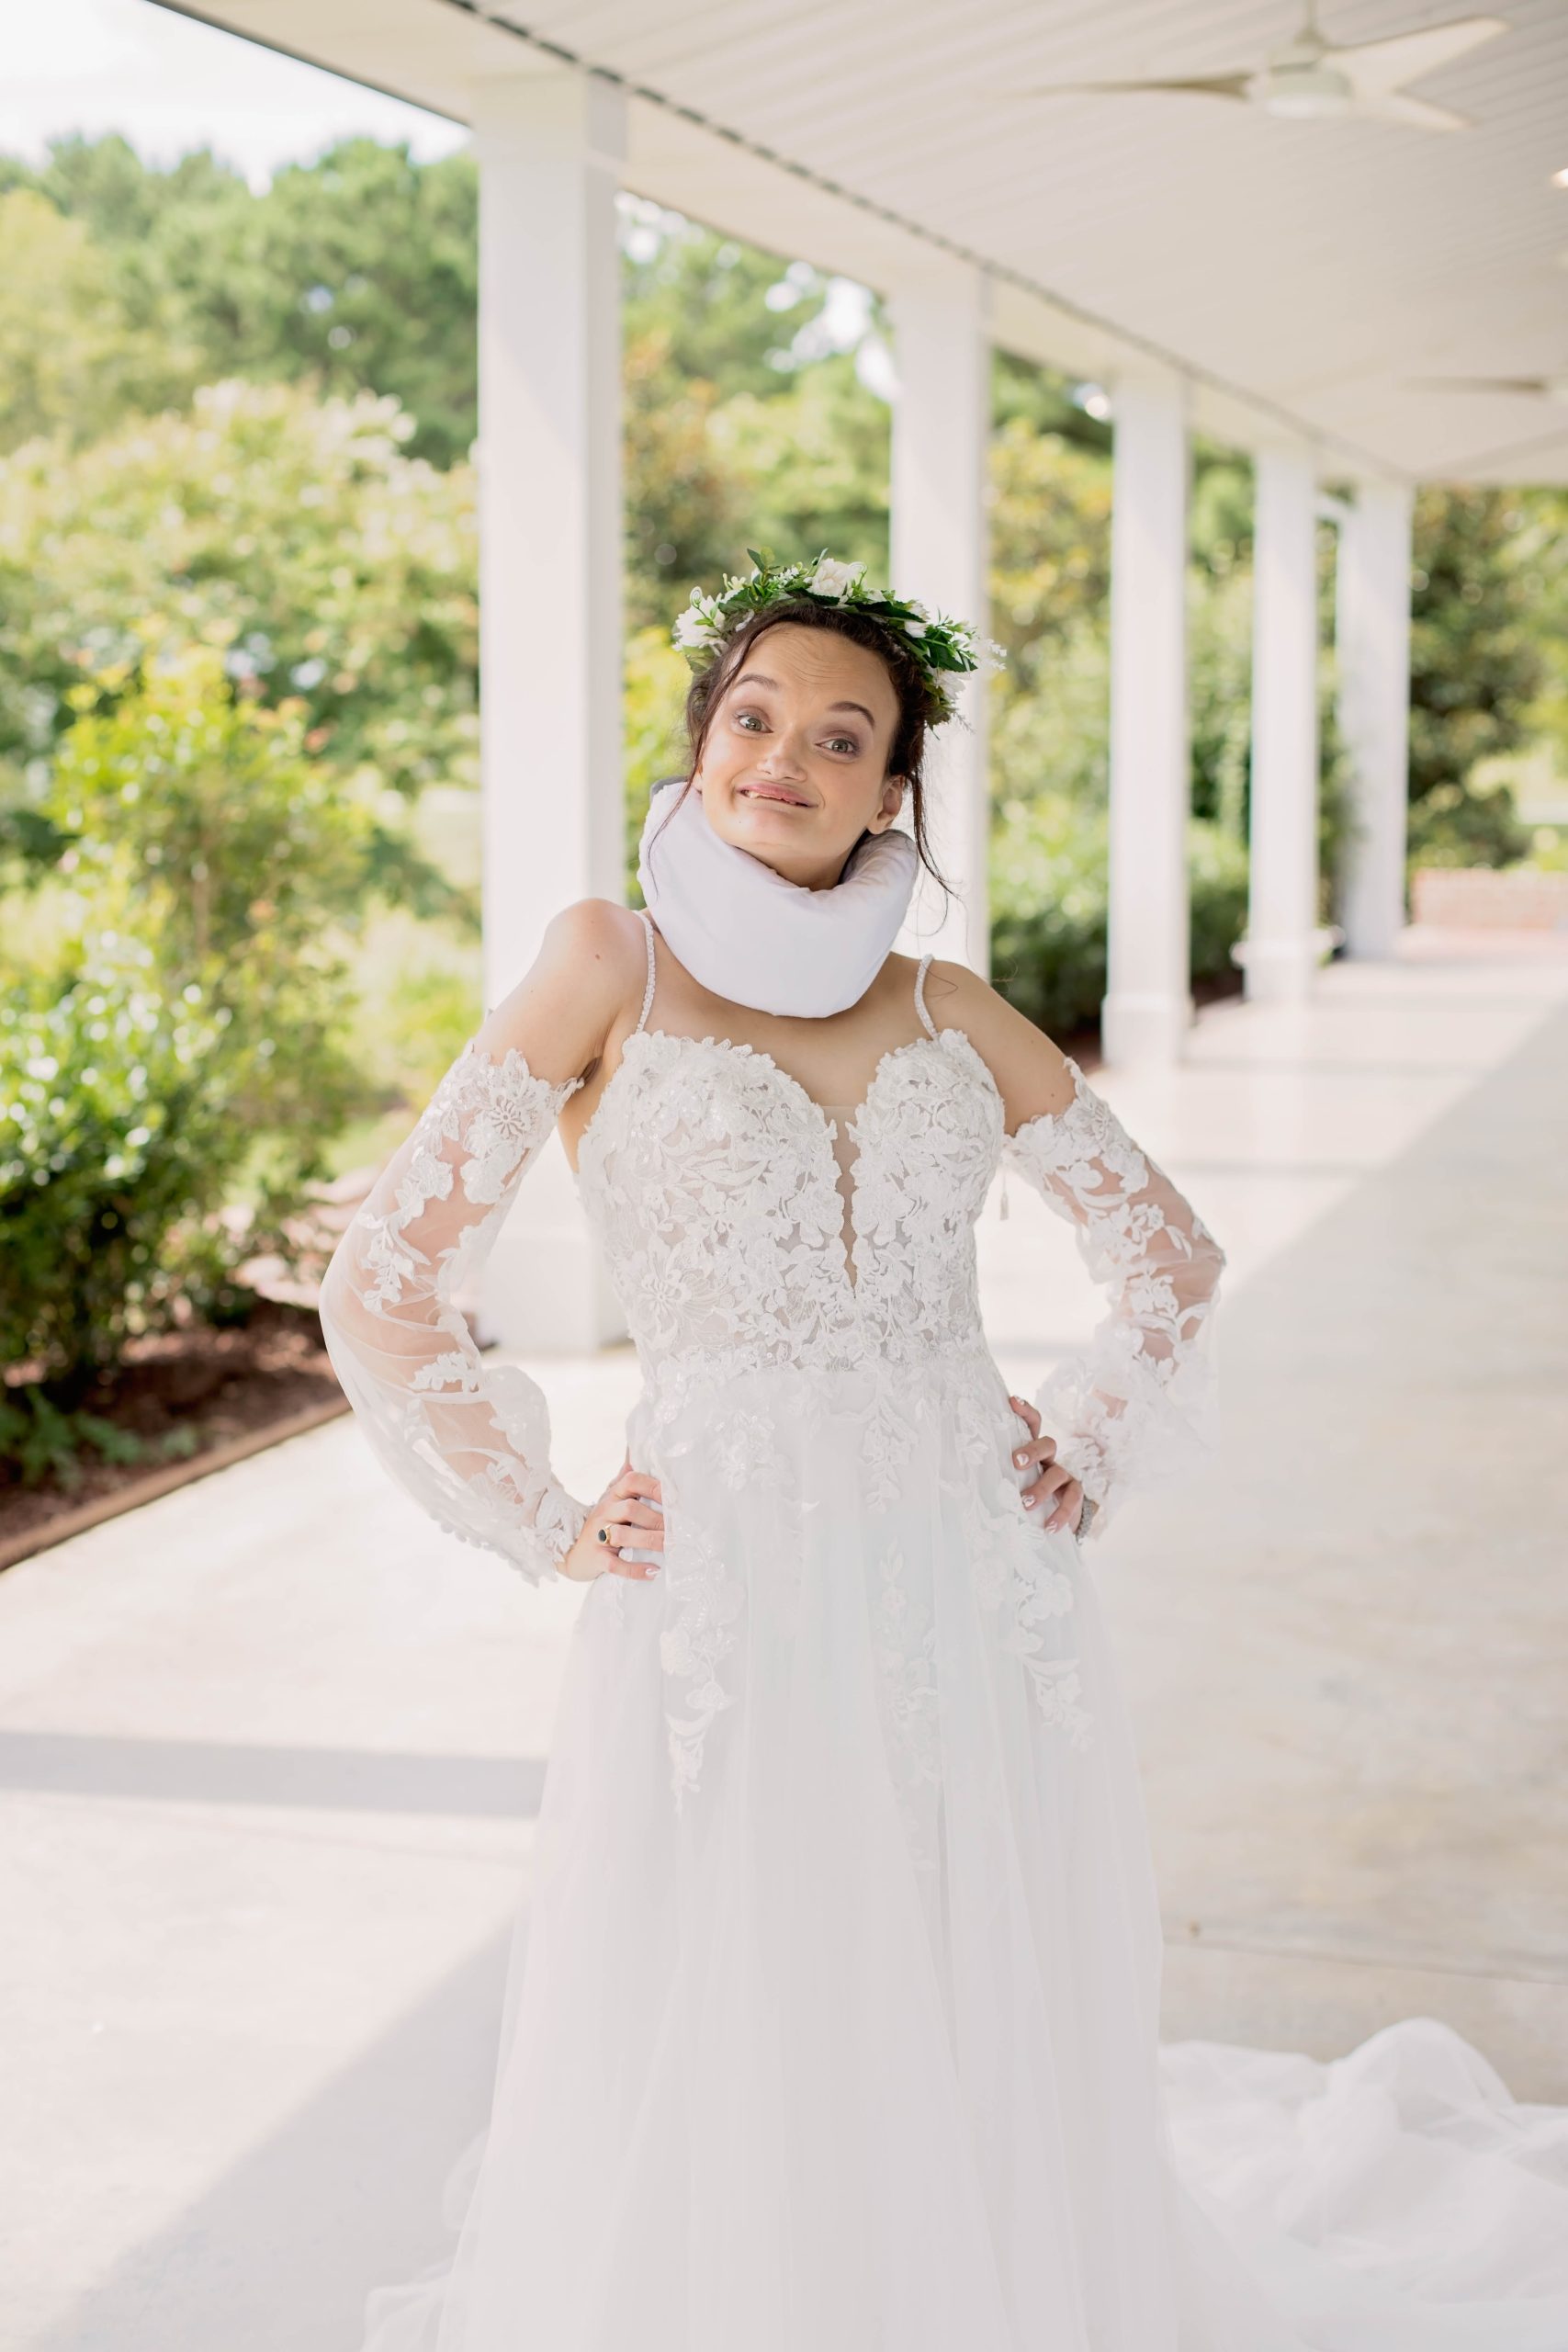 Bride With Cerebral Palsy Wearing Sexy Wedding Dress Called Stevie By Maggie Sottero